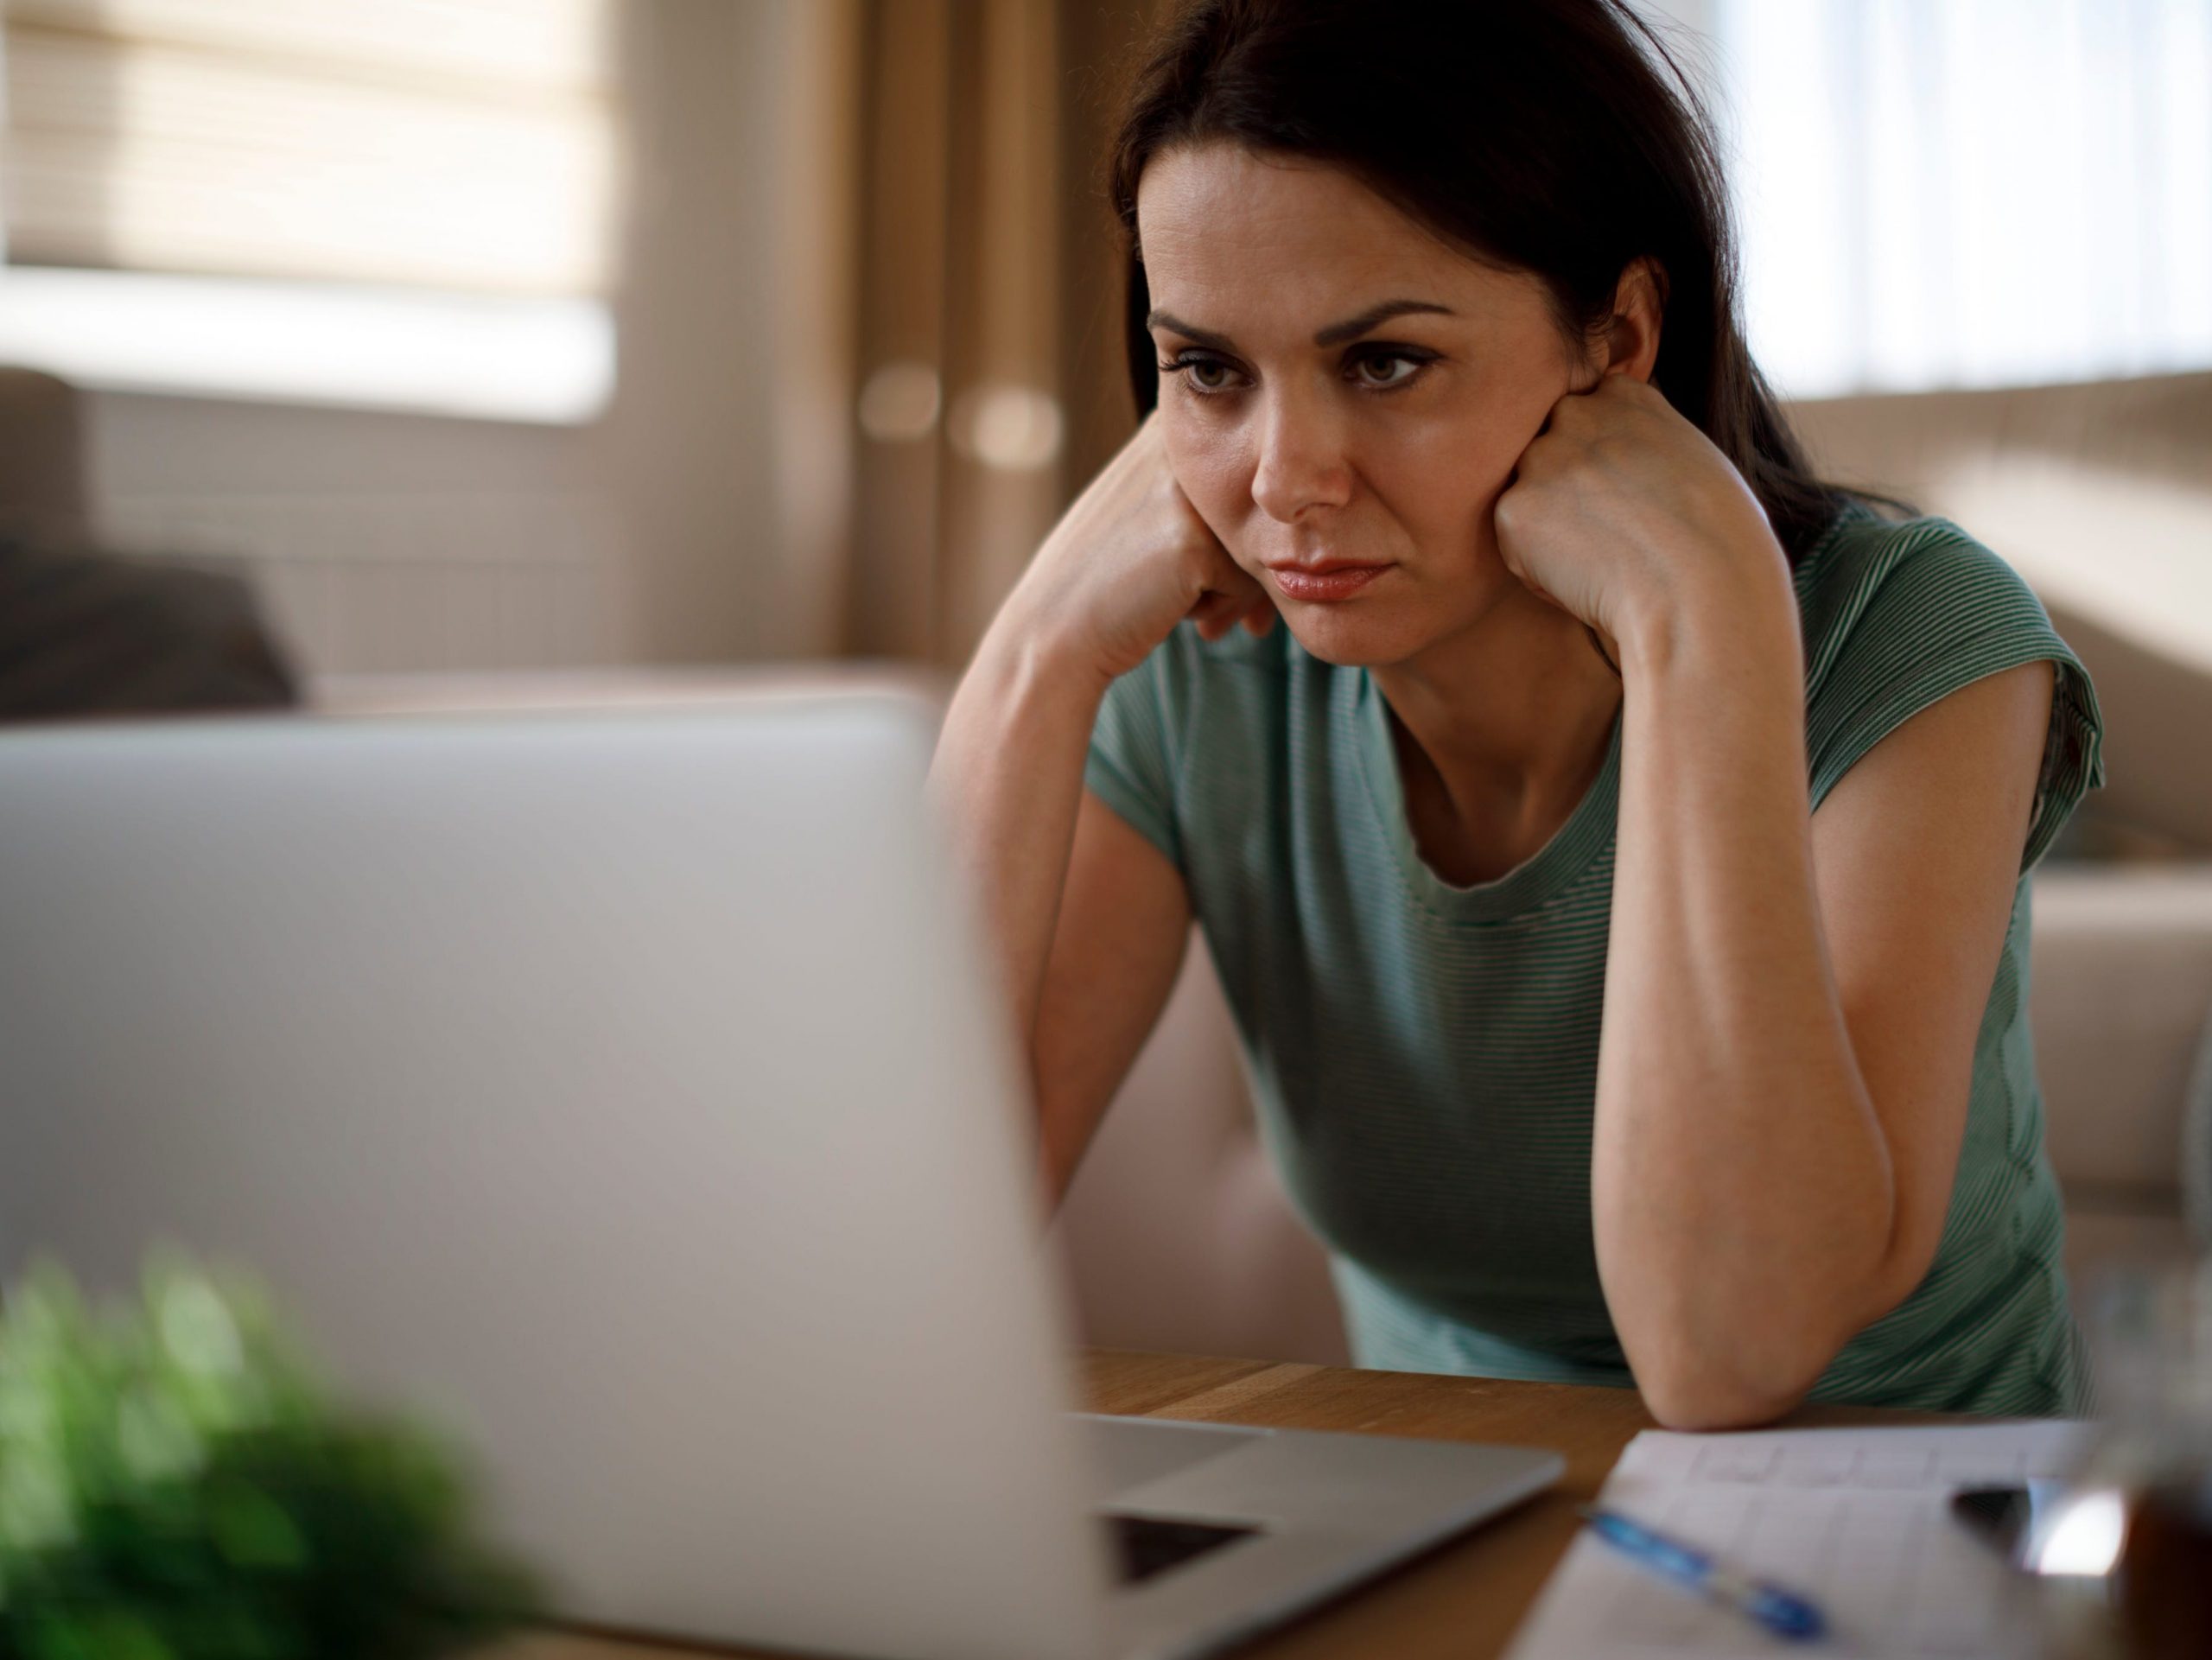 A woman looks sad as she stares at her laptop.